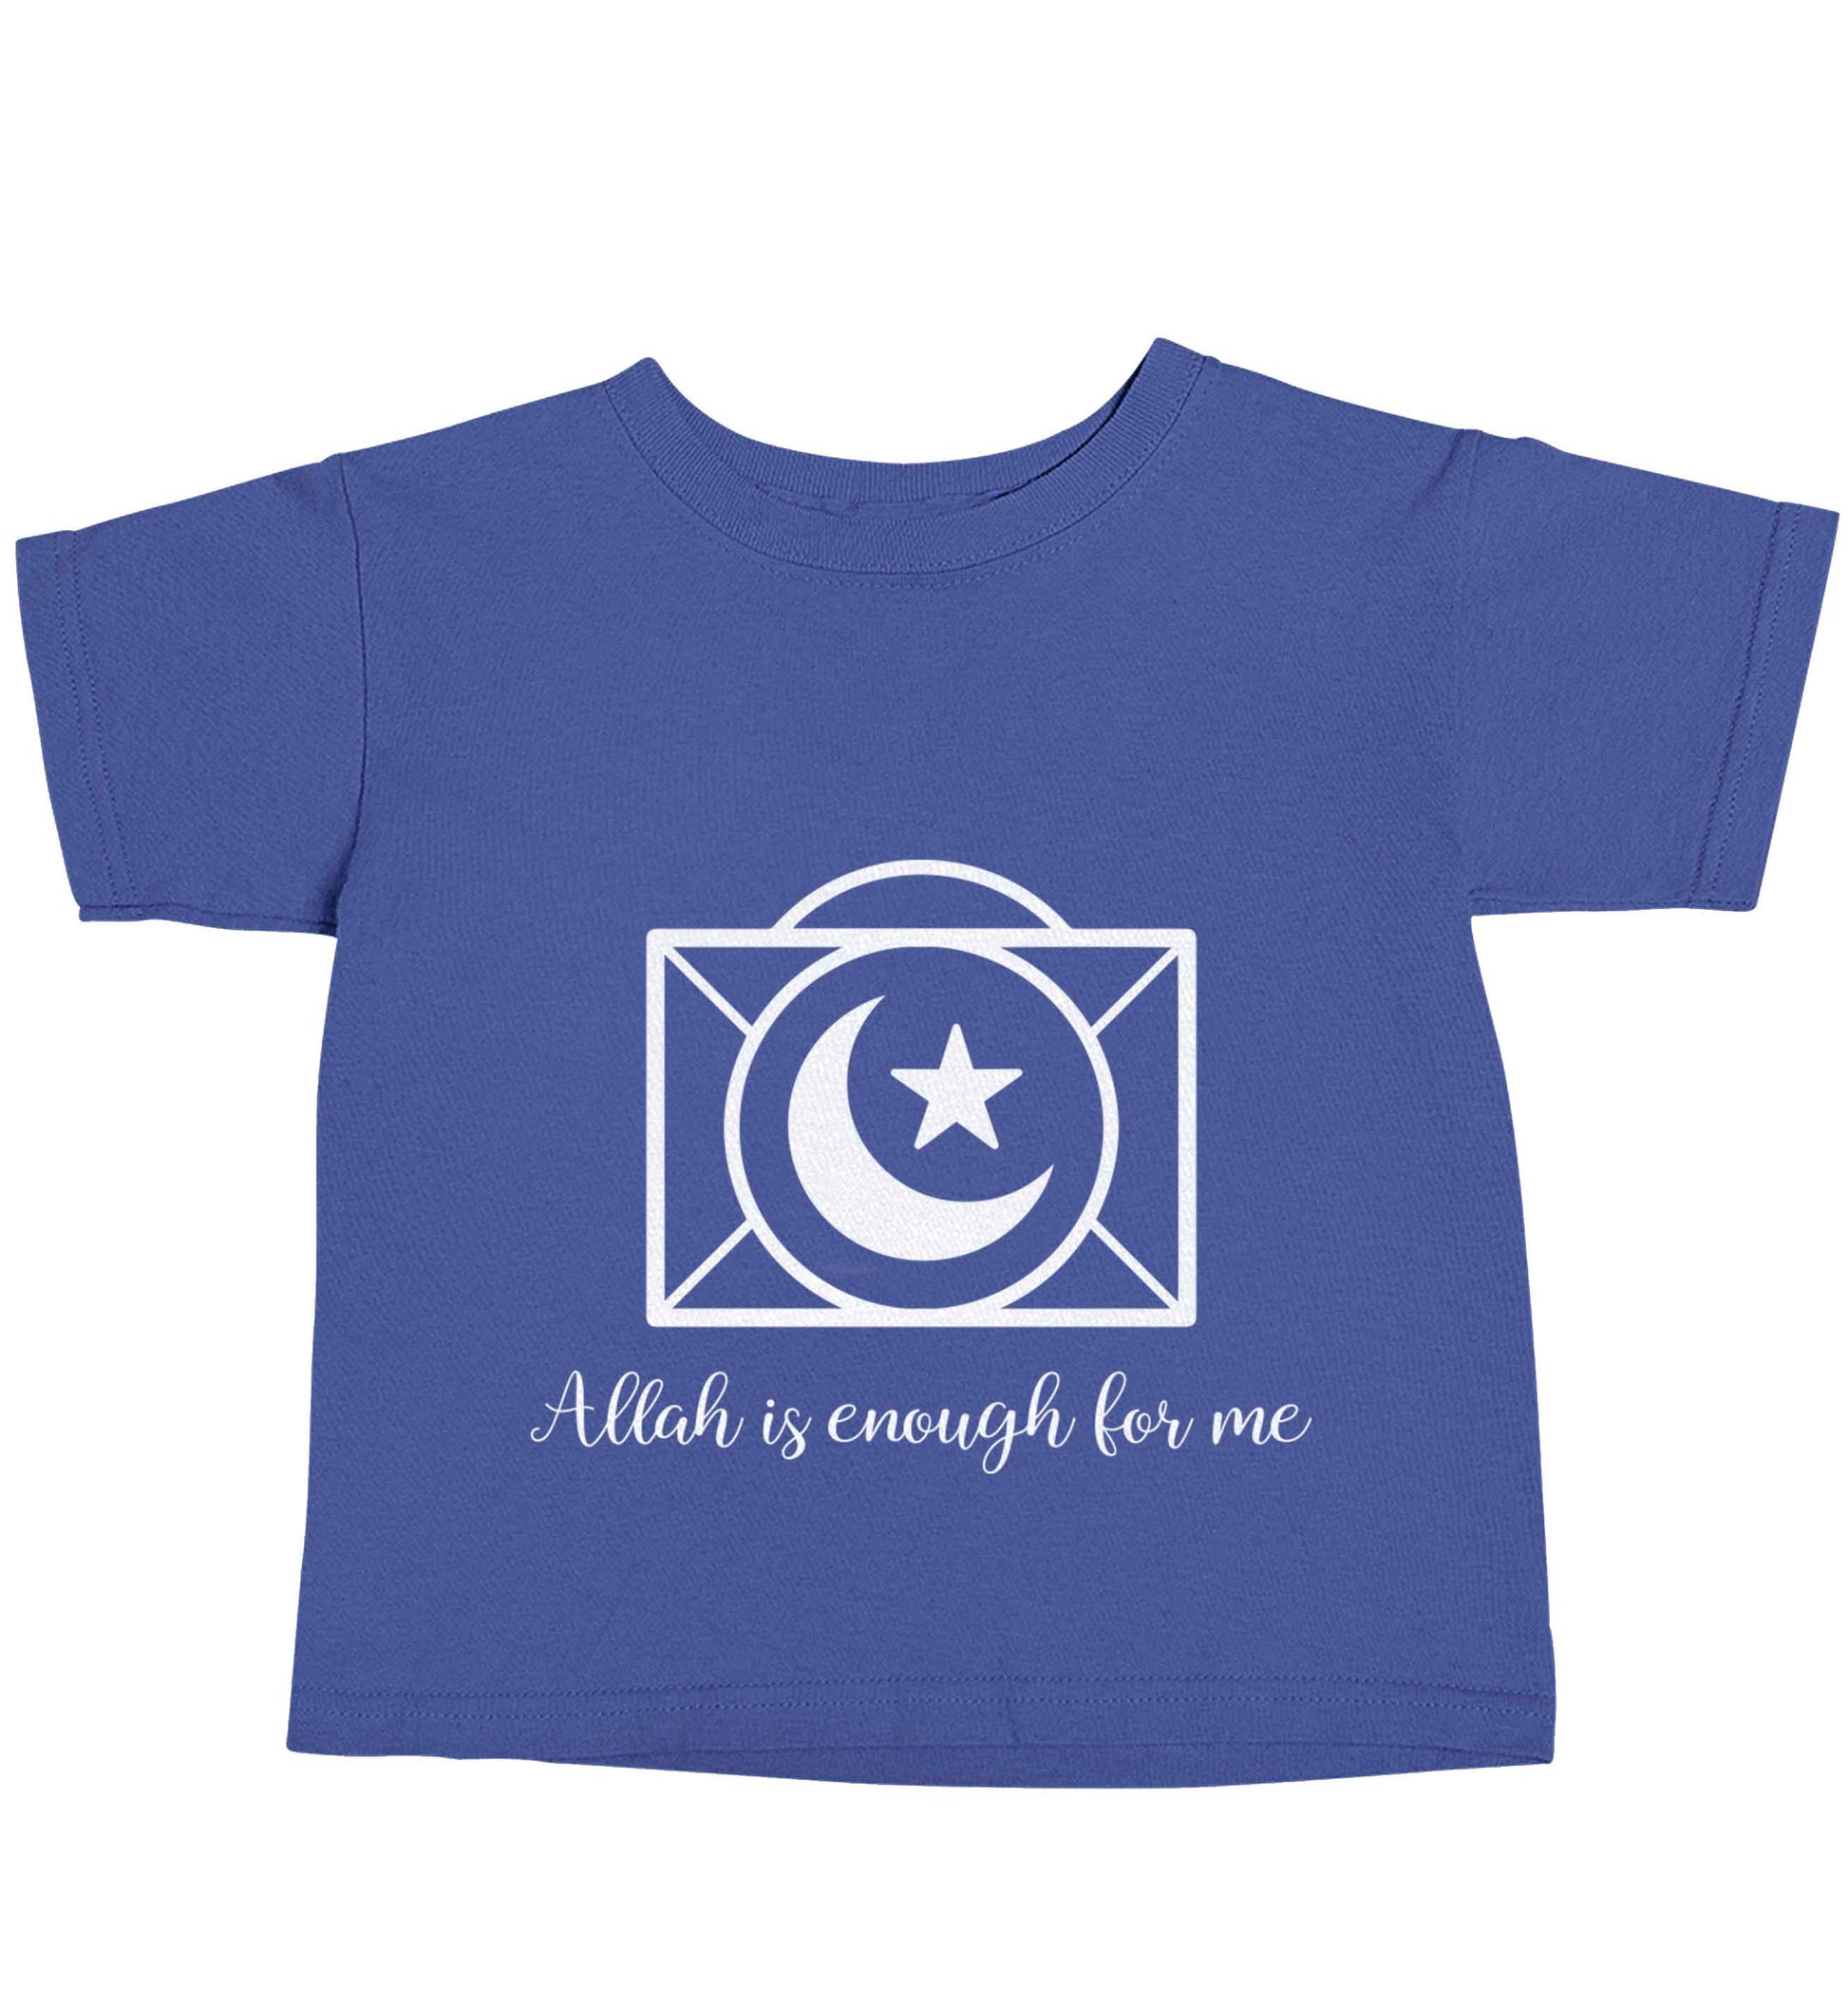 Allah is enough for me blue baby toddler Tshirt 2 Years